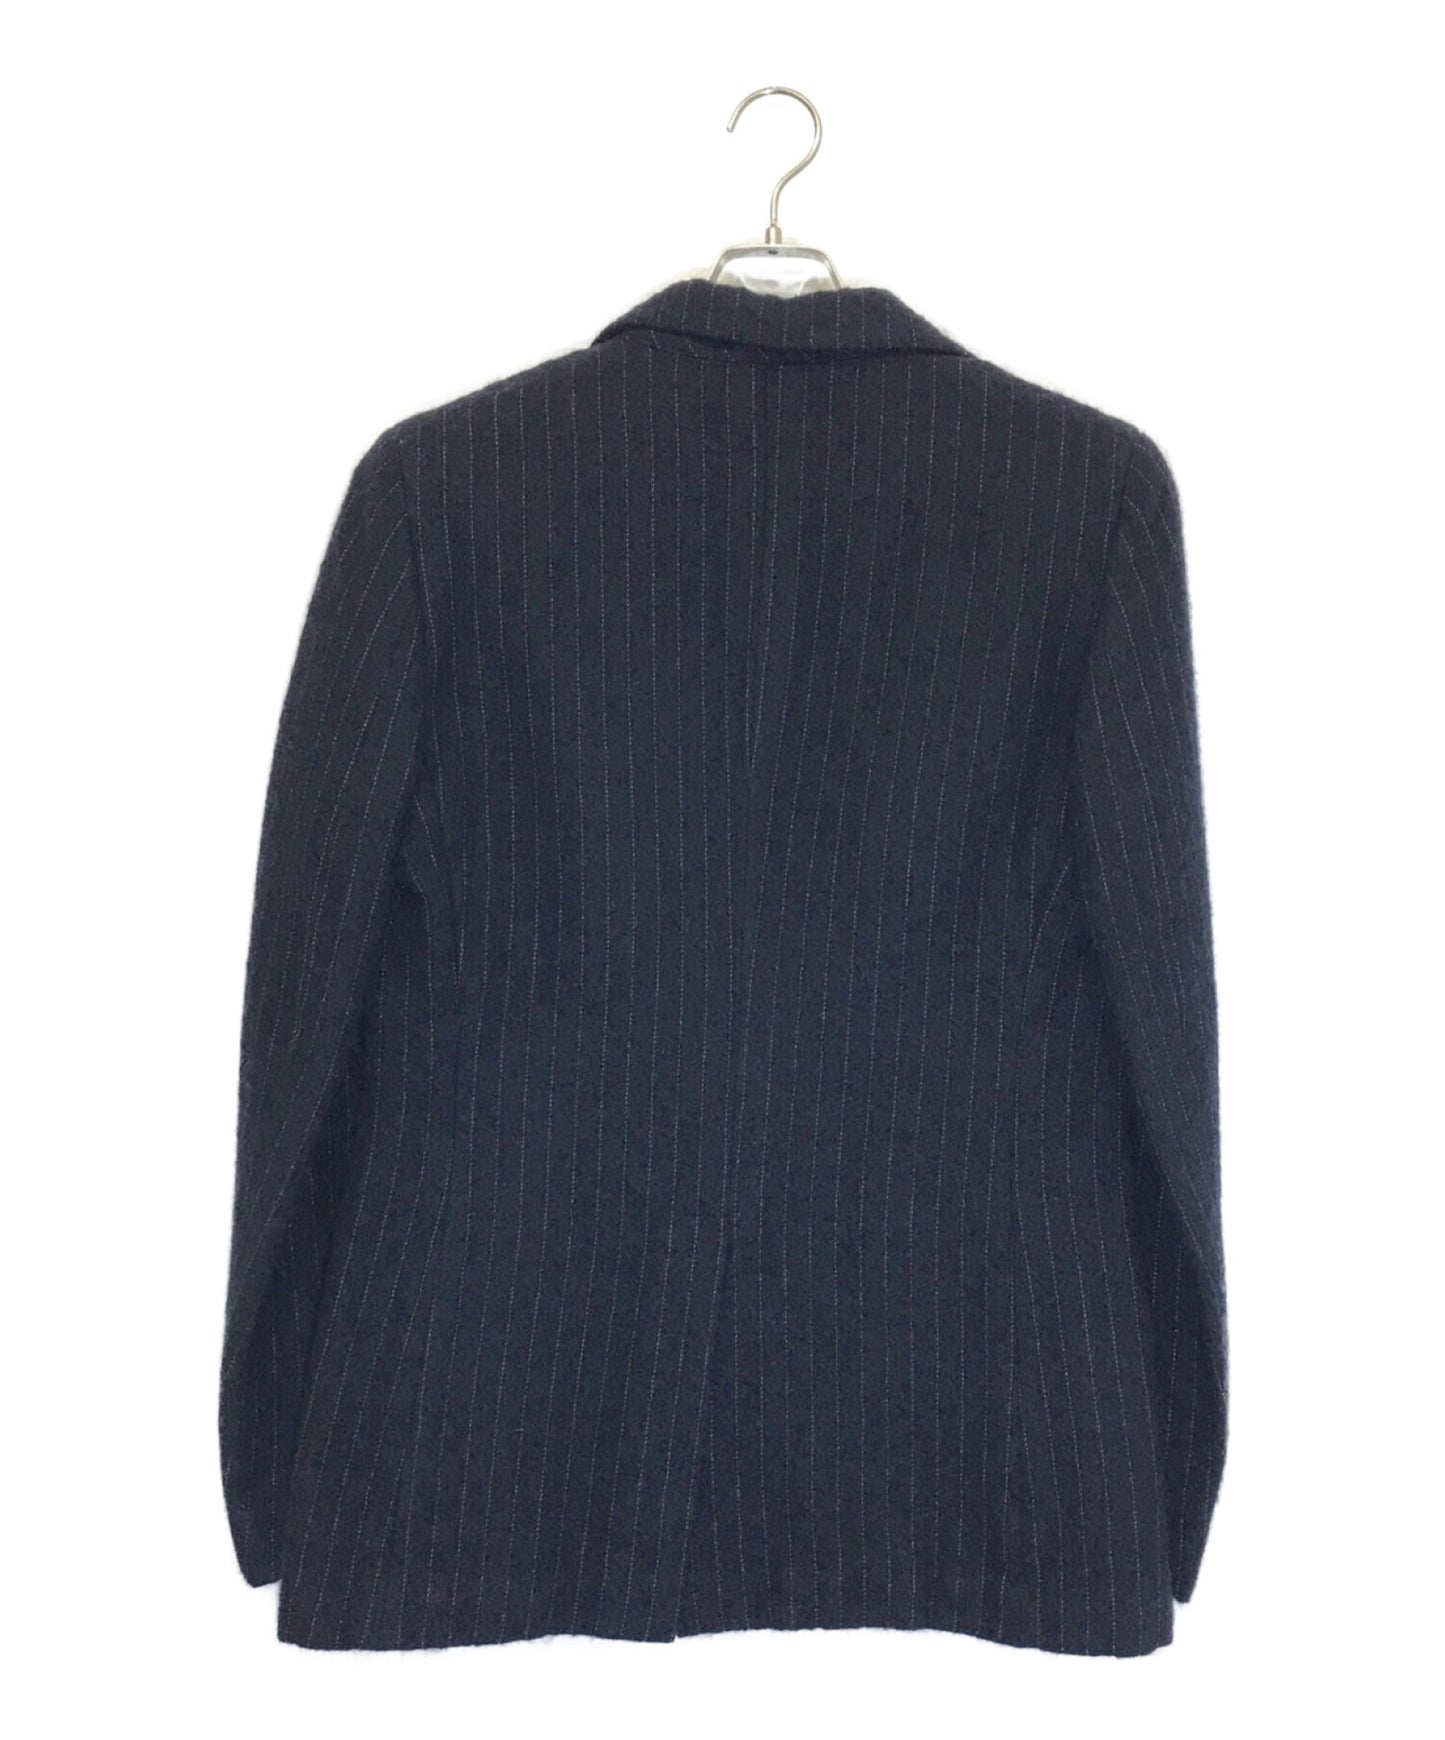 Comme des Garcons Homme Wool 재킷